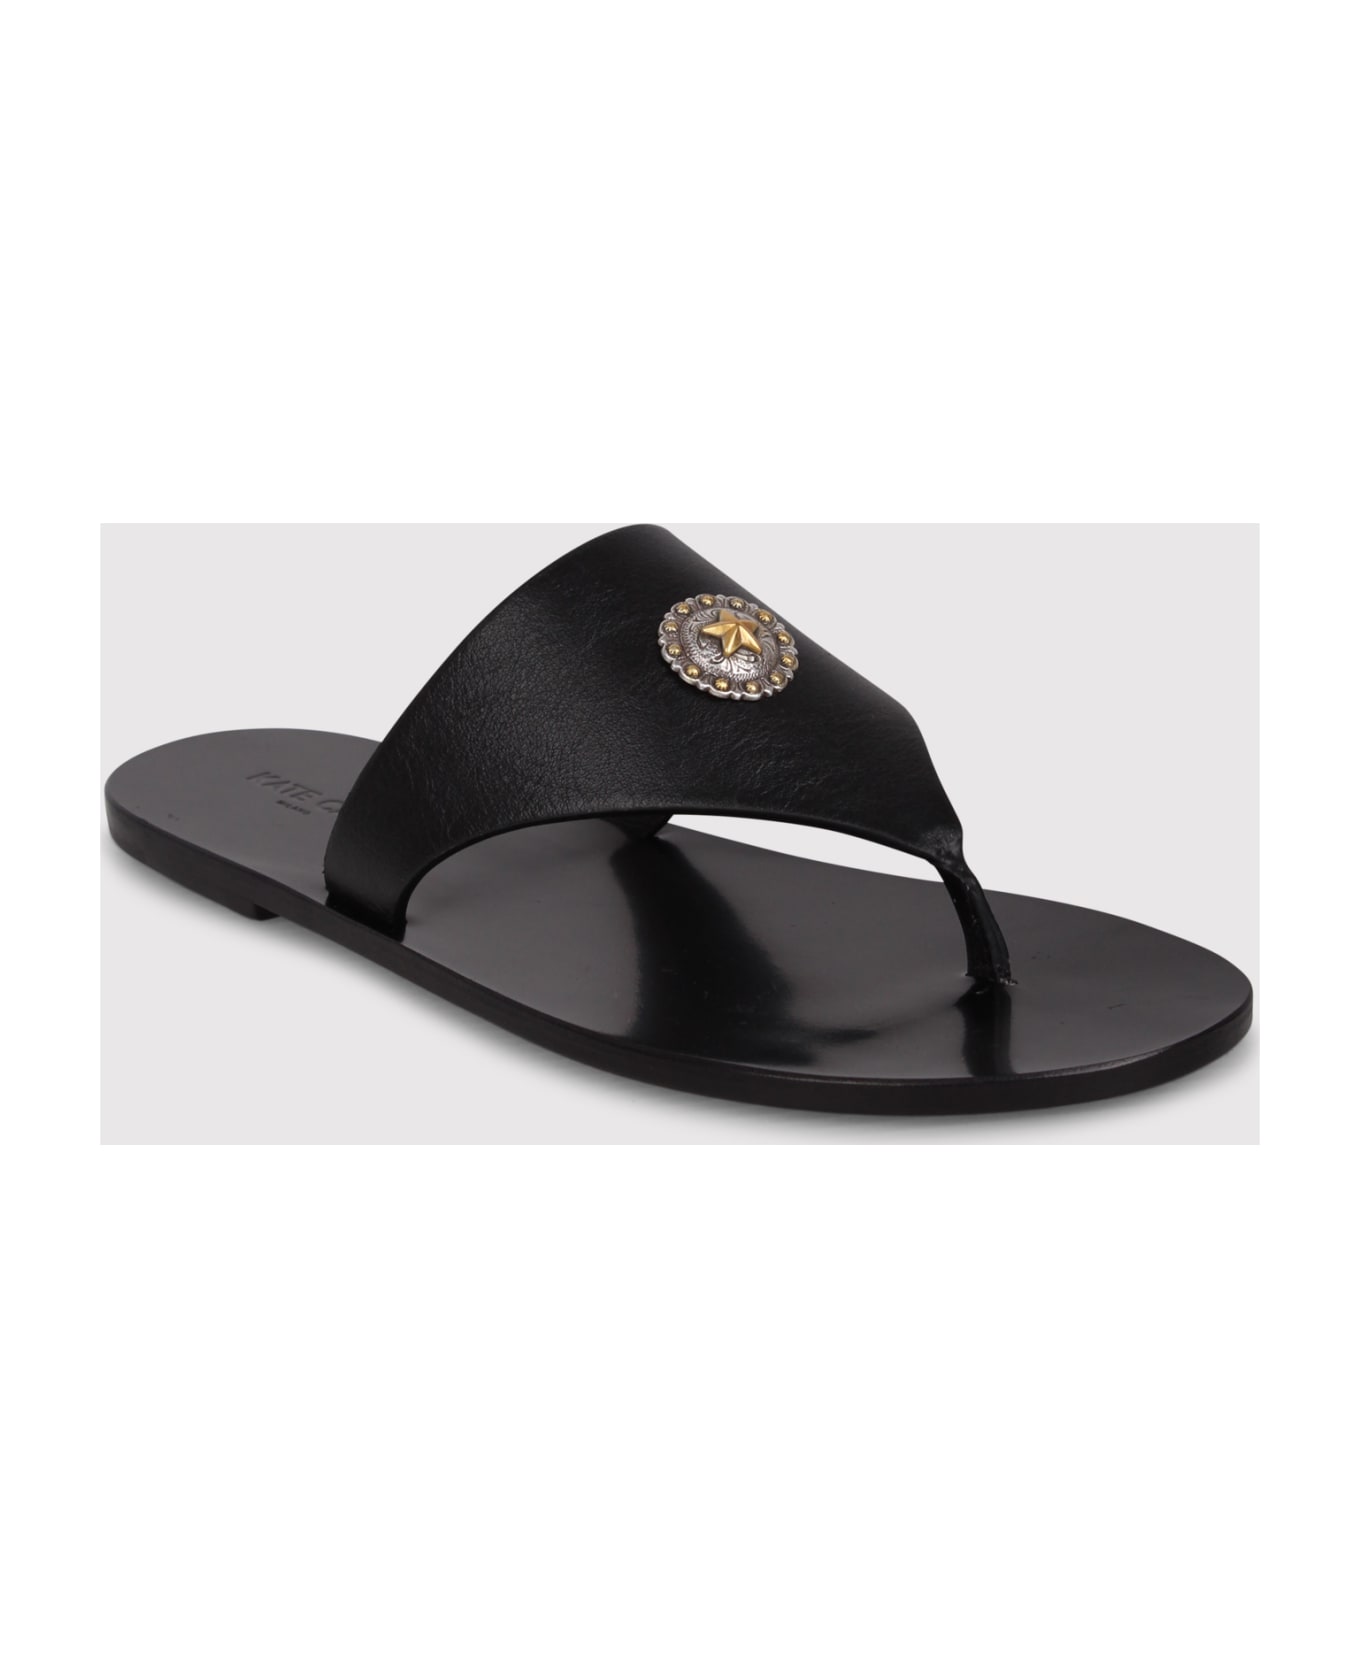 Kate Cate Phoebe Leather Flip-flops